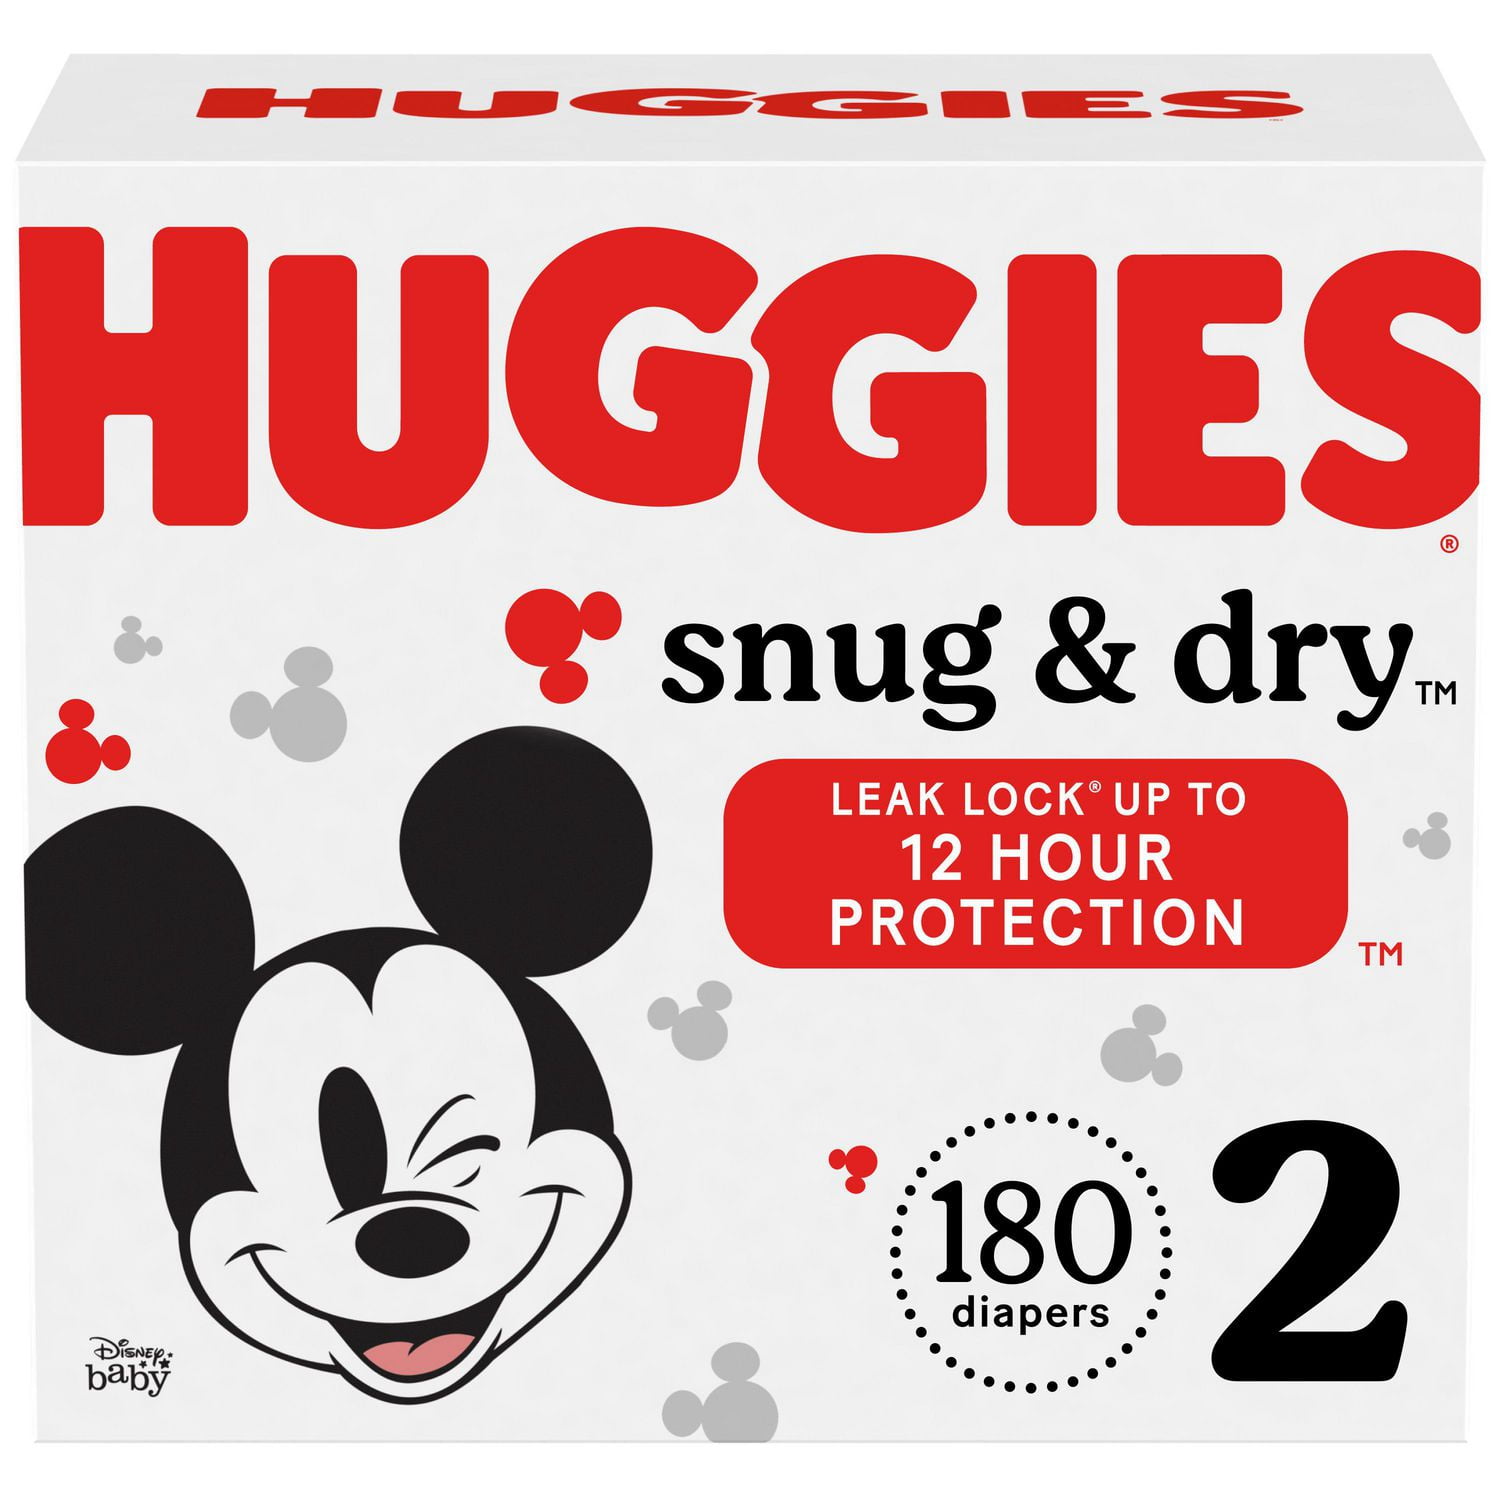 HUGGIES Snug & Dry Diapers, Mega Colossal Pack, Sizes: 1-7